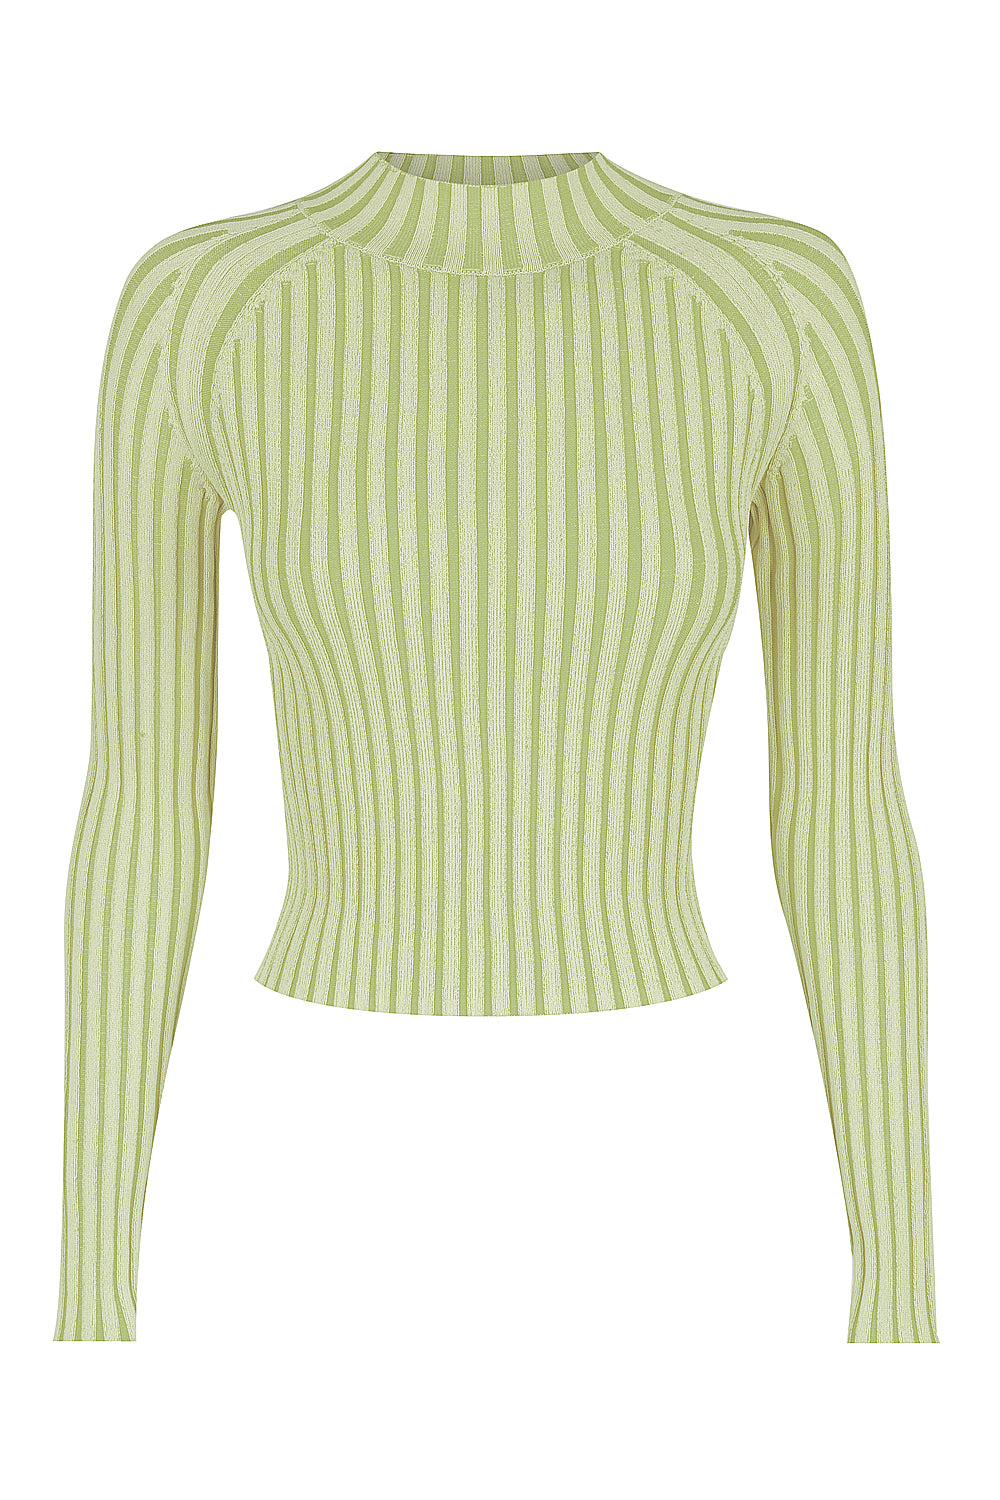 The All Sorts Two-Tone Knit Top - Citrus Green